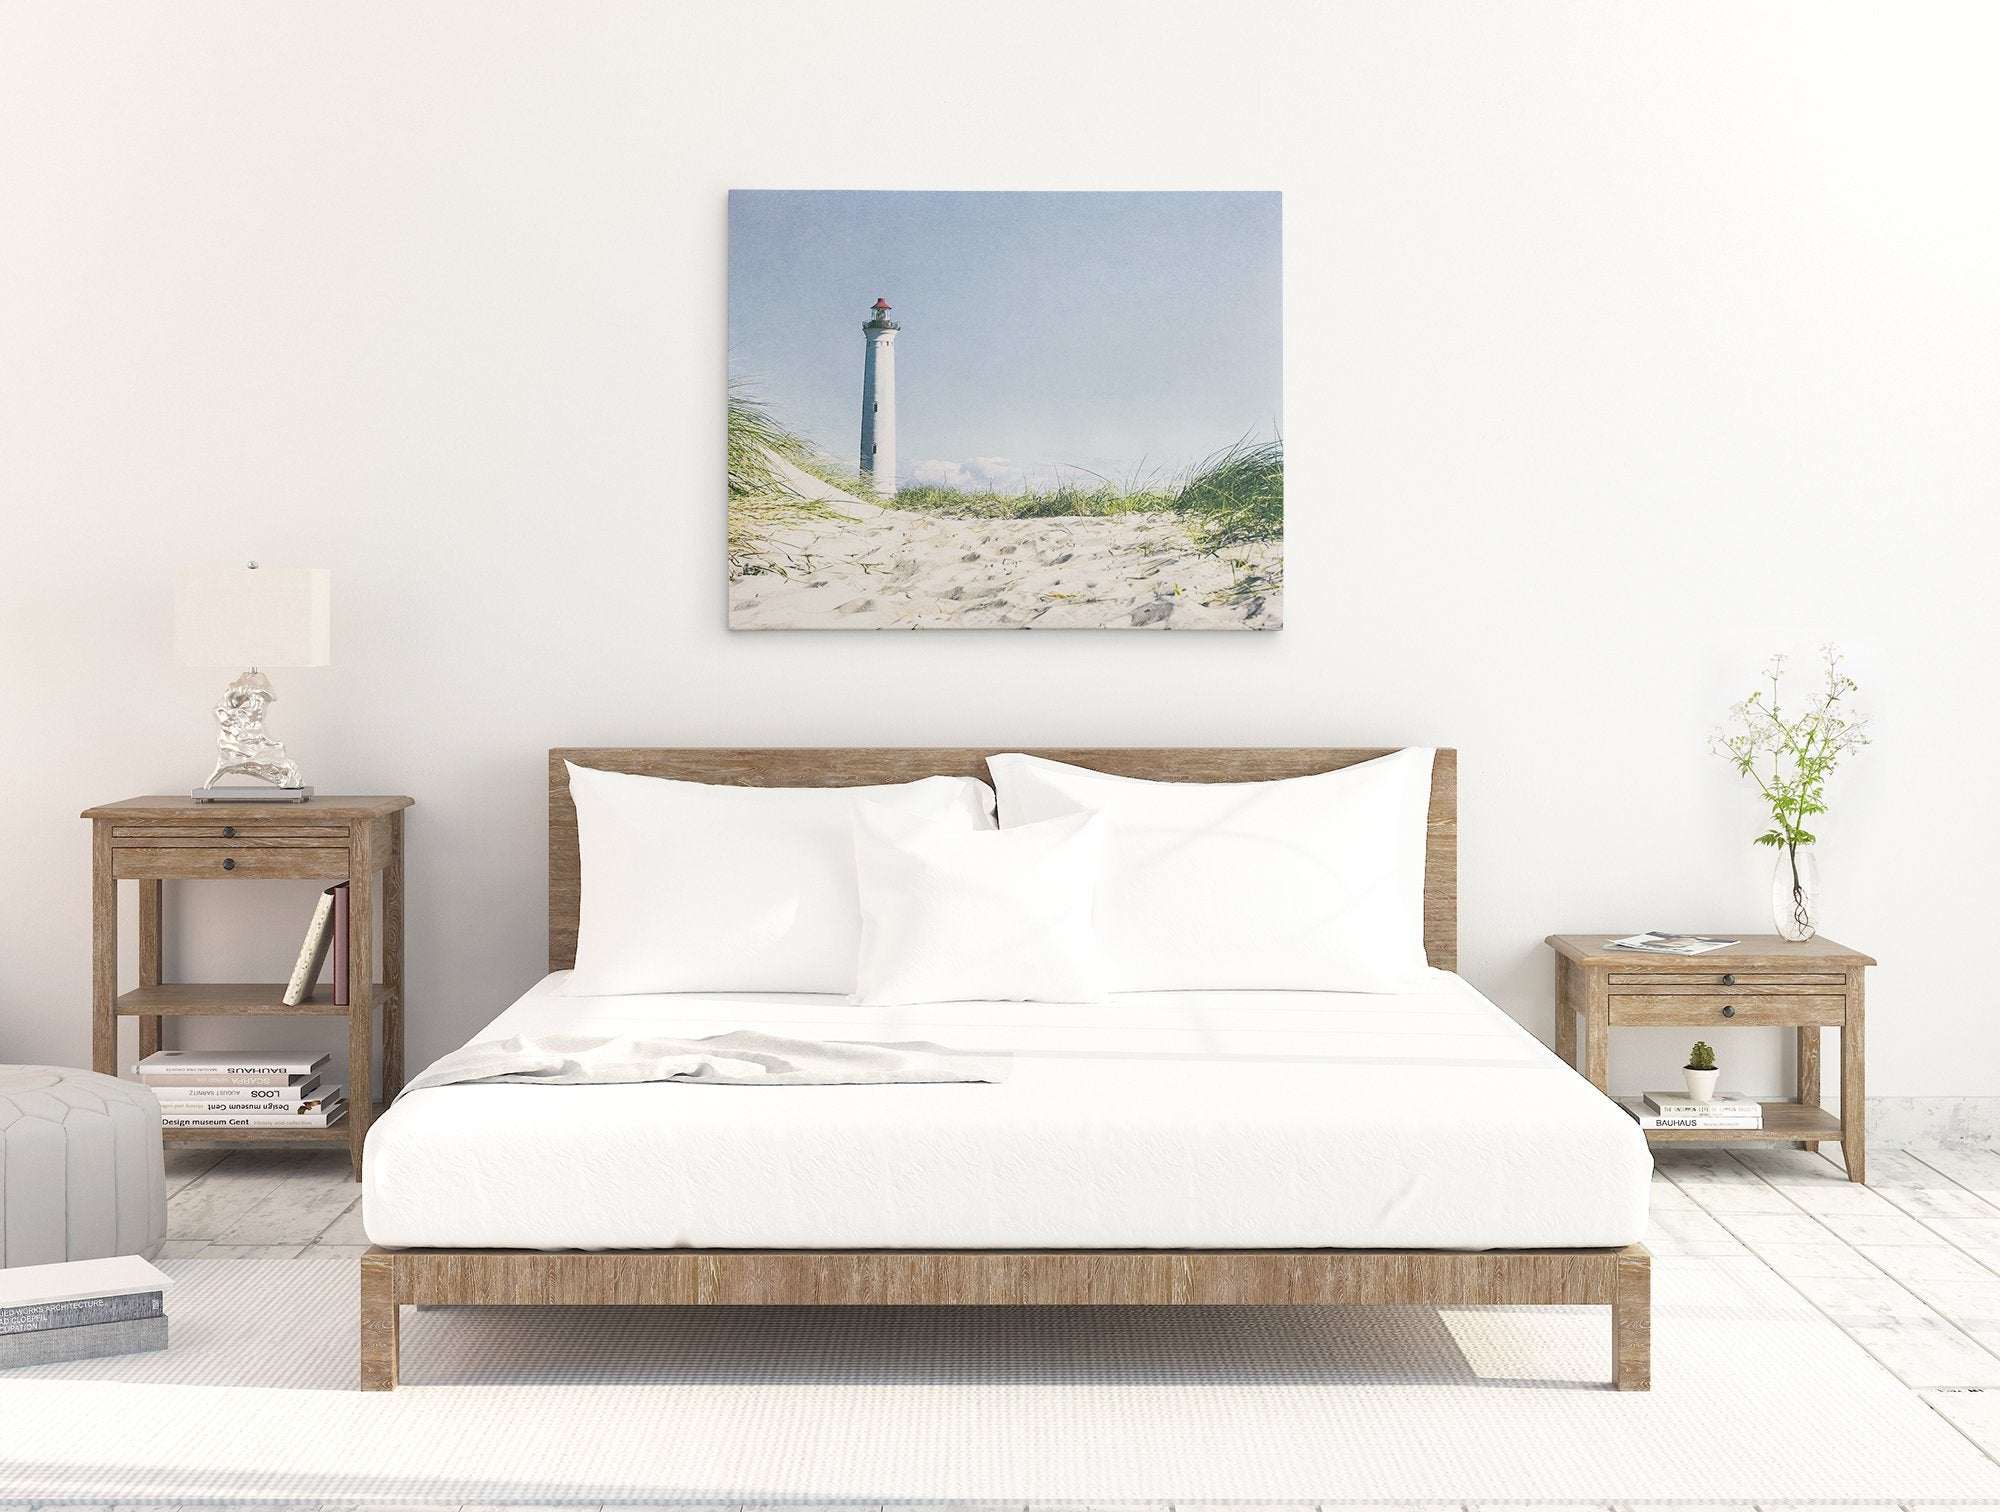 A minimalist bedroom with a wooden bed frame and white bedding. Two wooden nightstands flank the bed, each with a lamp and various decor. Above the bed, a large **Offley Green Nautical Canvas Wall Art, &#39;The Lighthouse&#39;** is displayed. The room has a bright, airy feel with white walls and a light floor.